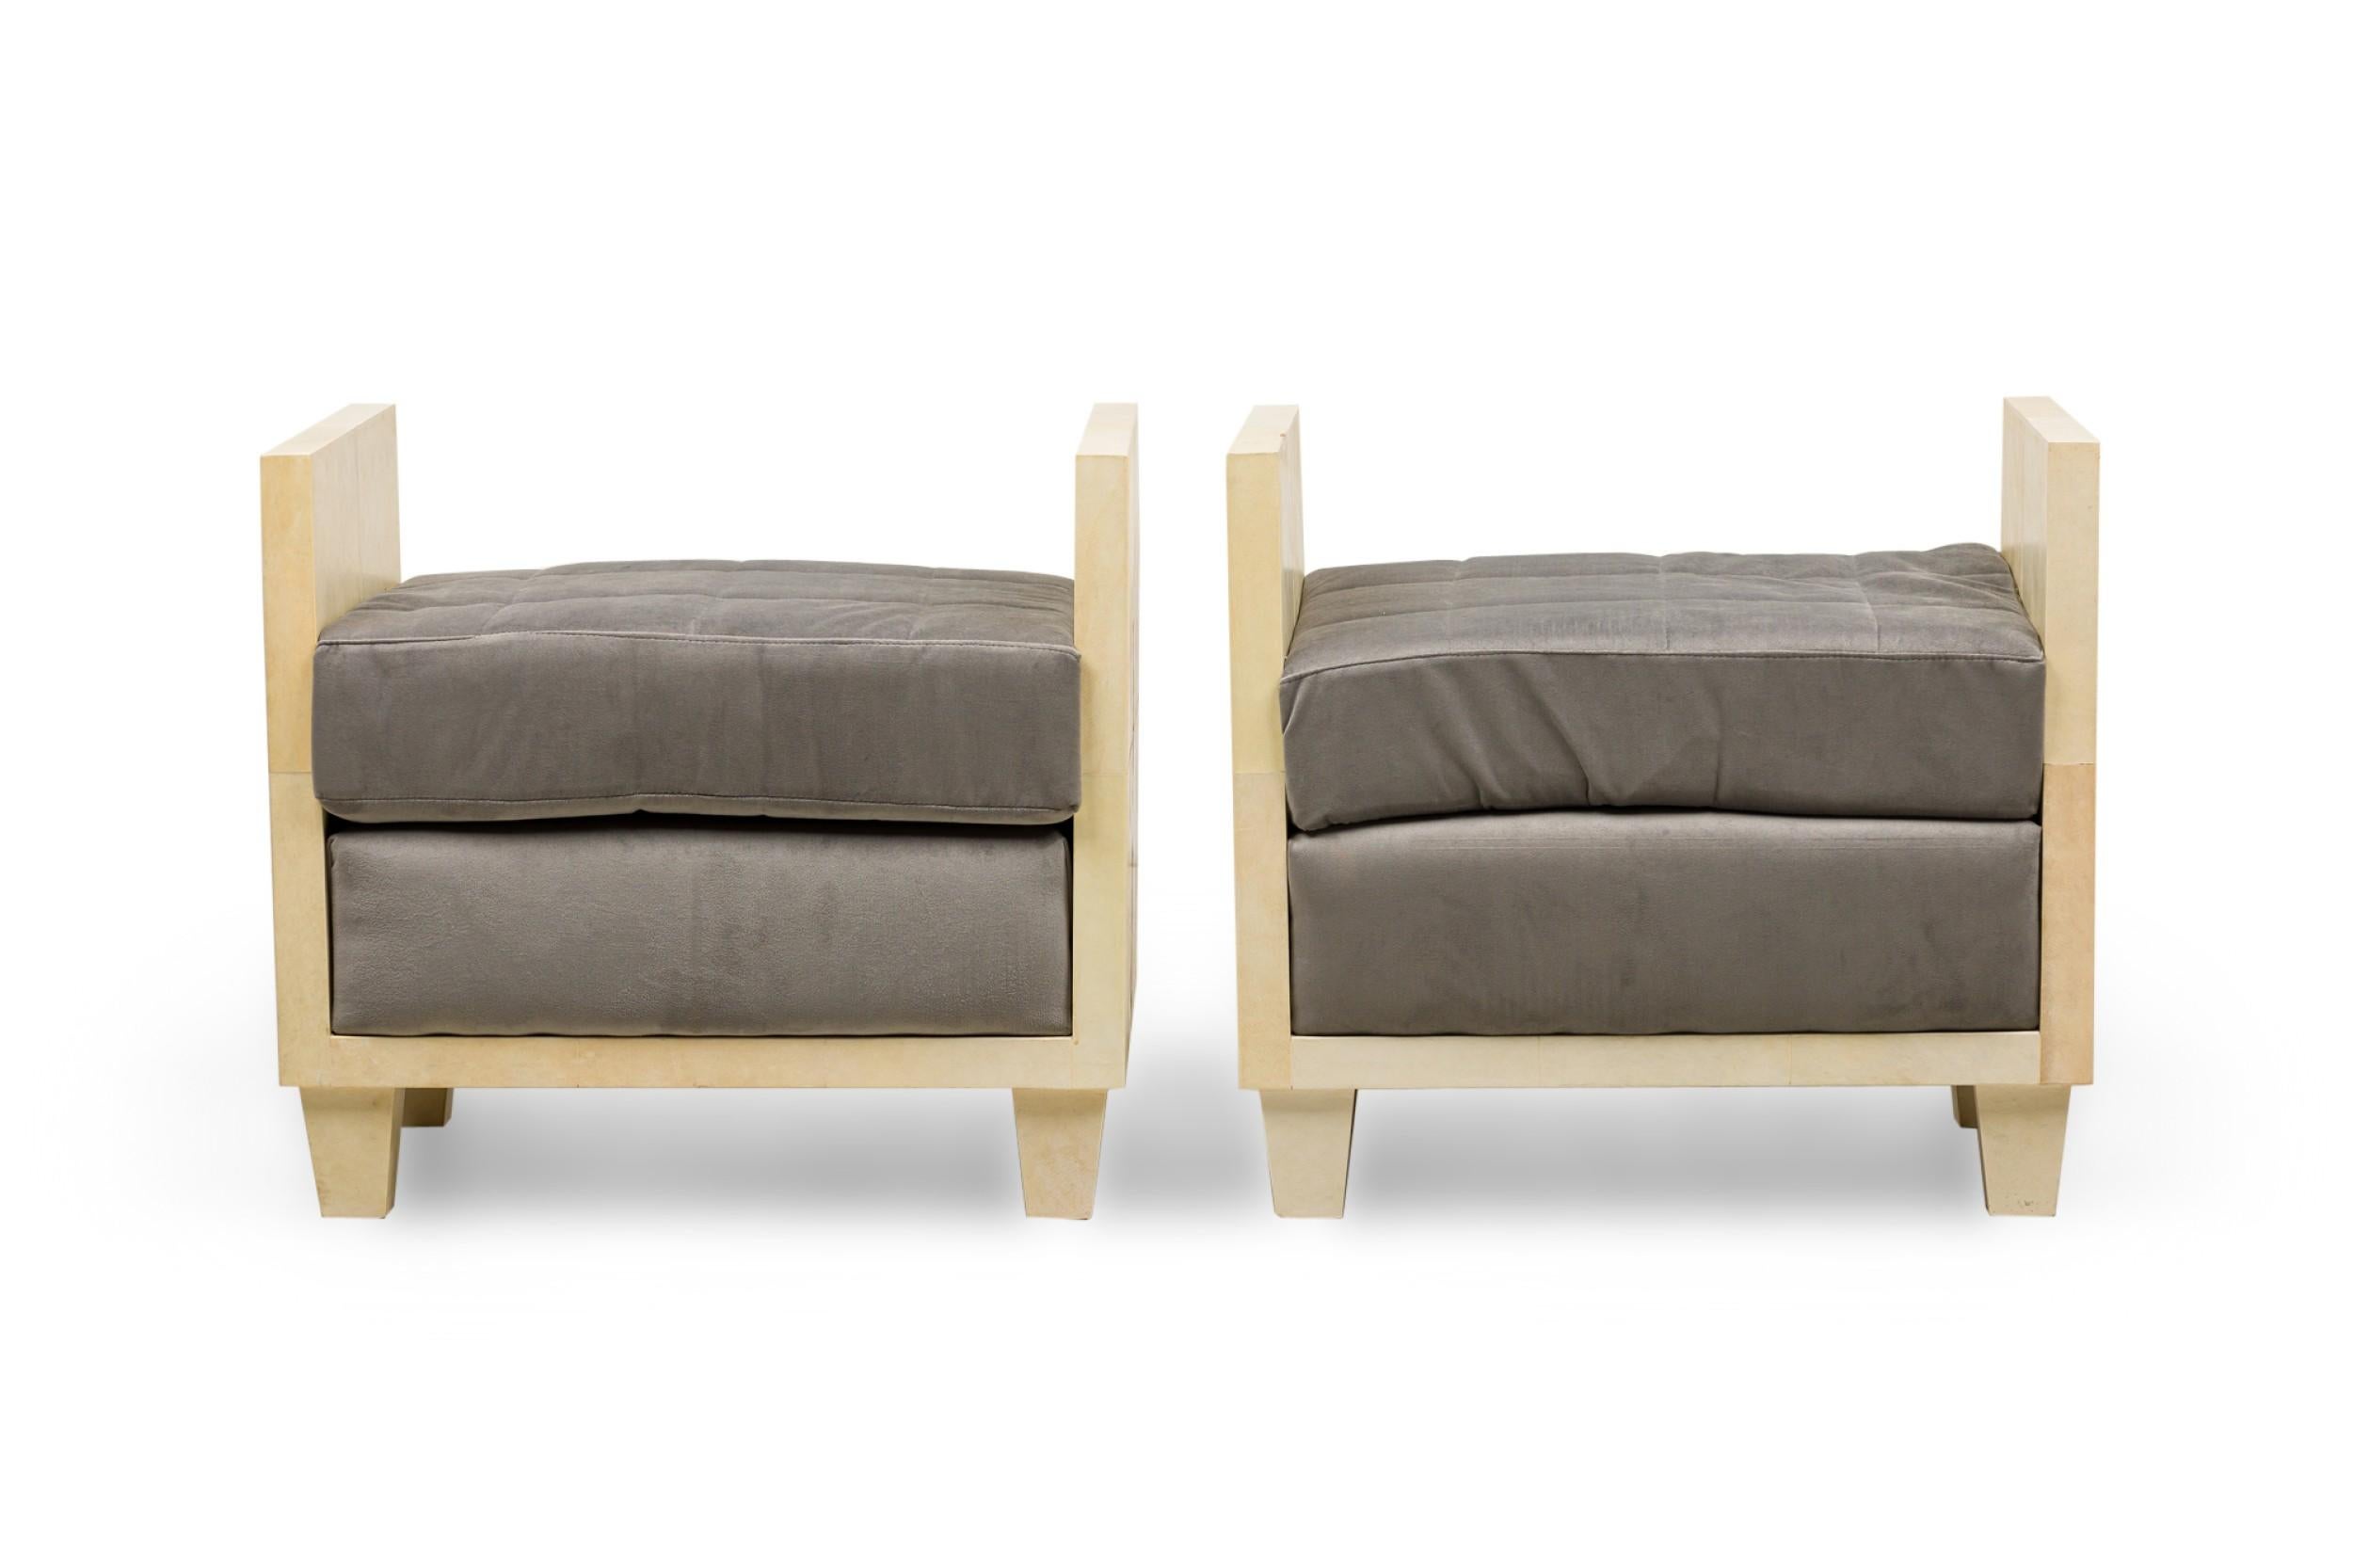 Pair of midcentury American parchment covered rectangular benches in a modern geometric style with upholstered, tufted seat cushions in a gray fabric, resting on 4 tapered legs. (In the manner of Samuel Marx).